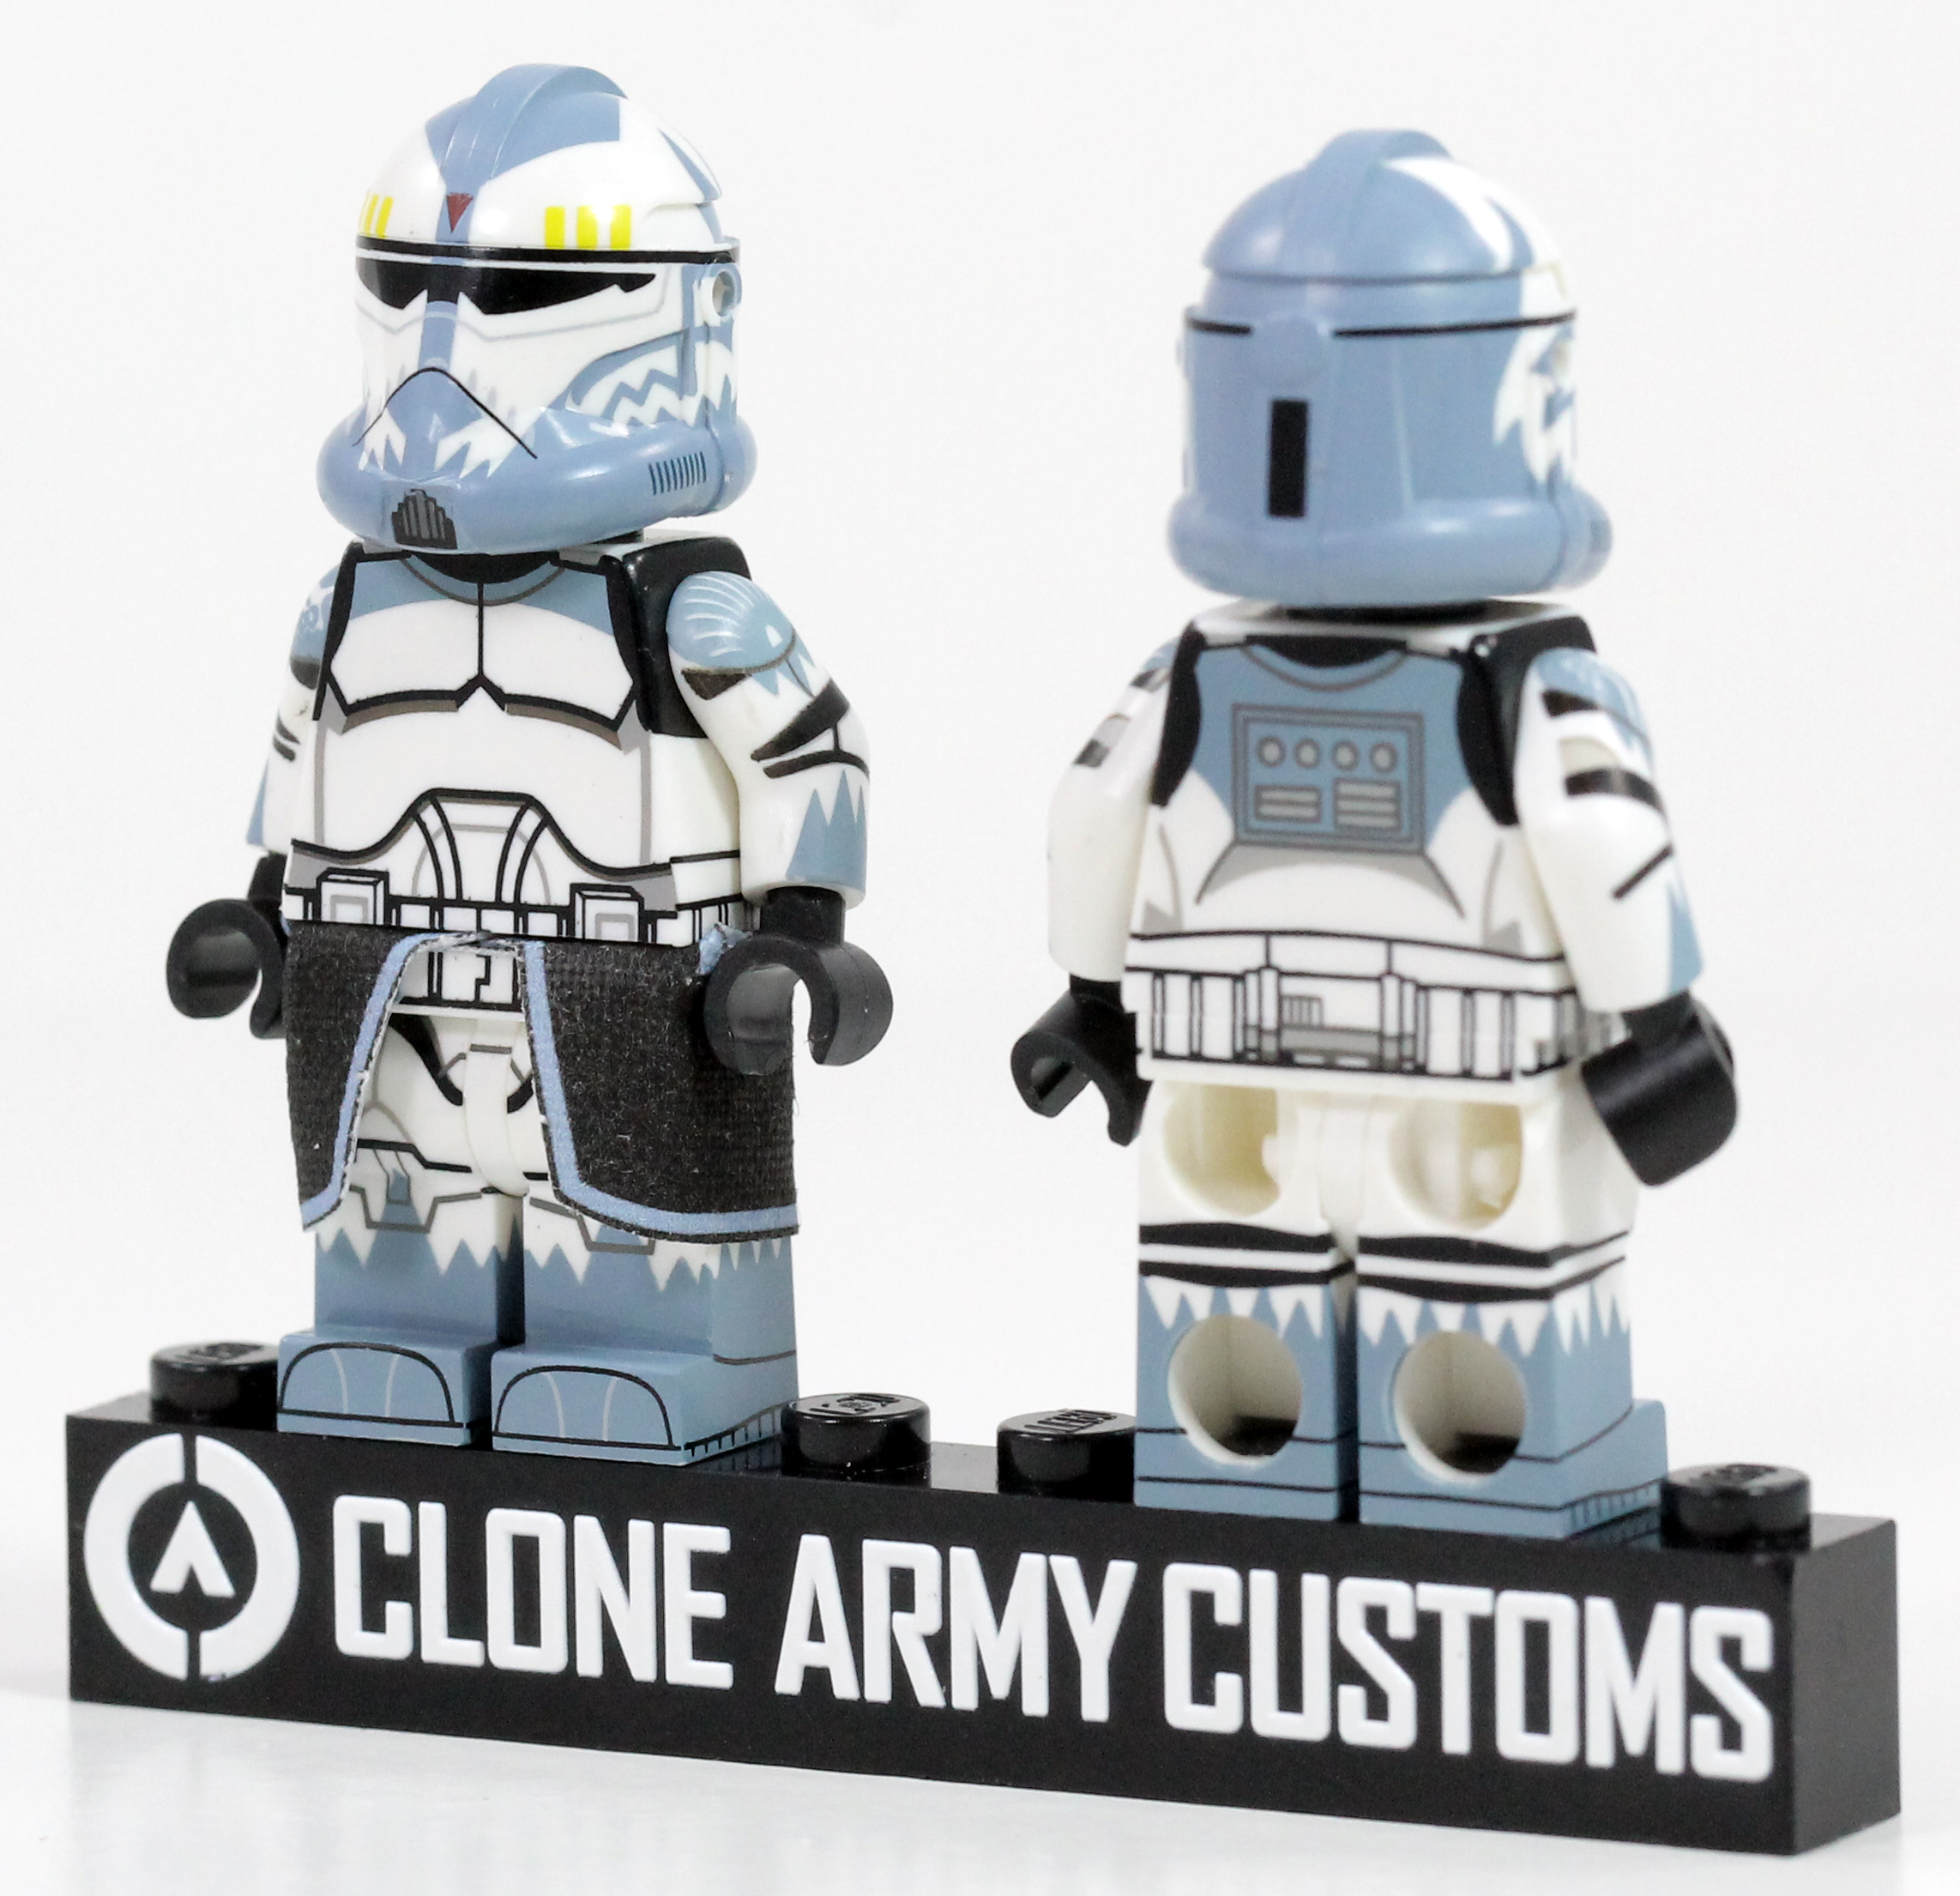 Commander Wolffe Realistic Recon Trooper Star Wars Minifig - Clone Army Customs (CAC)